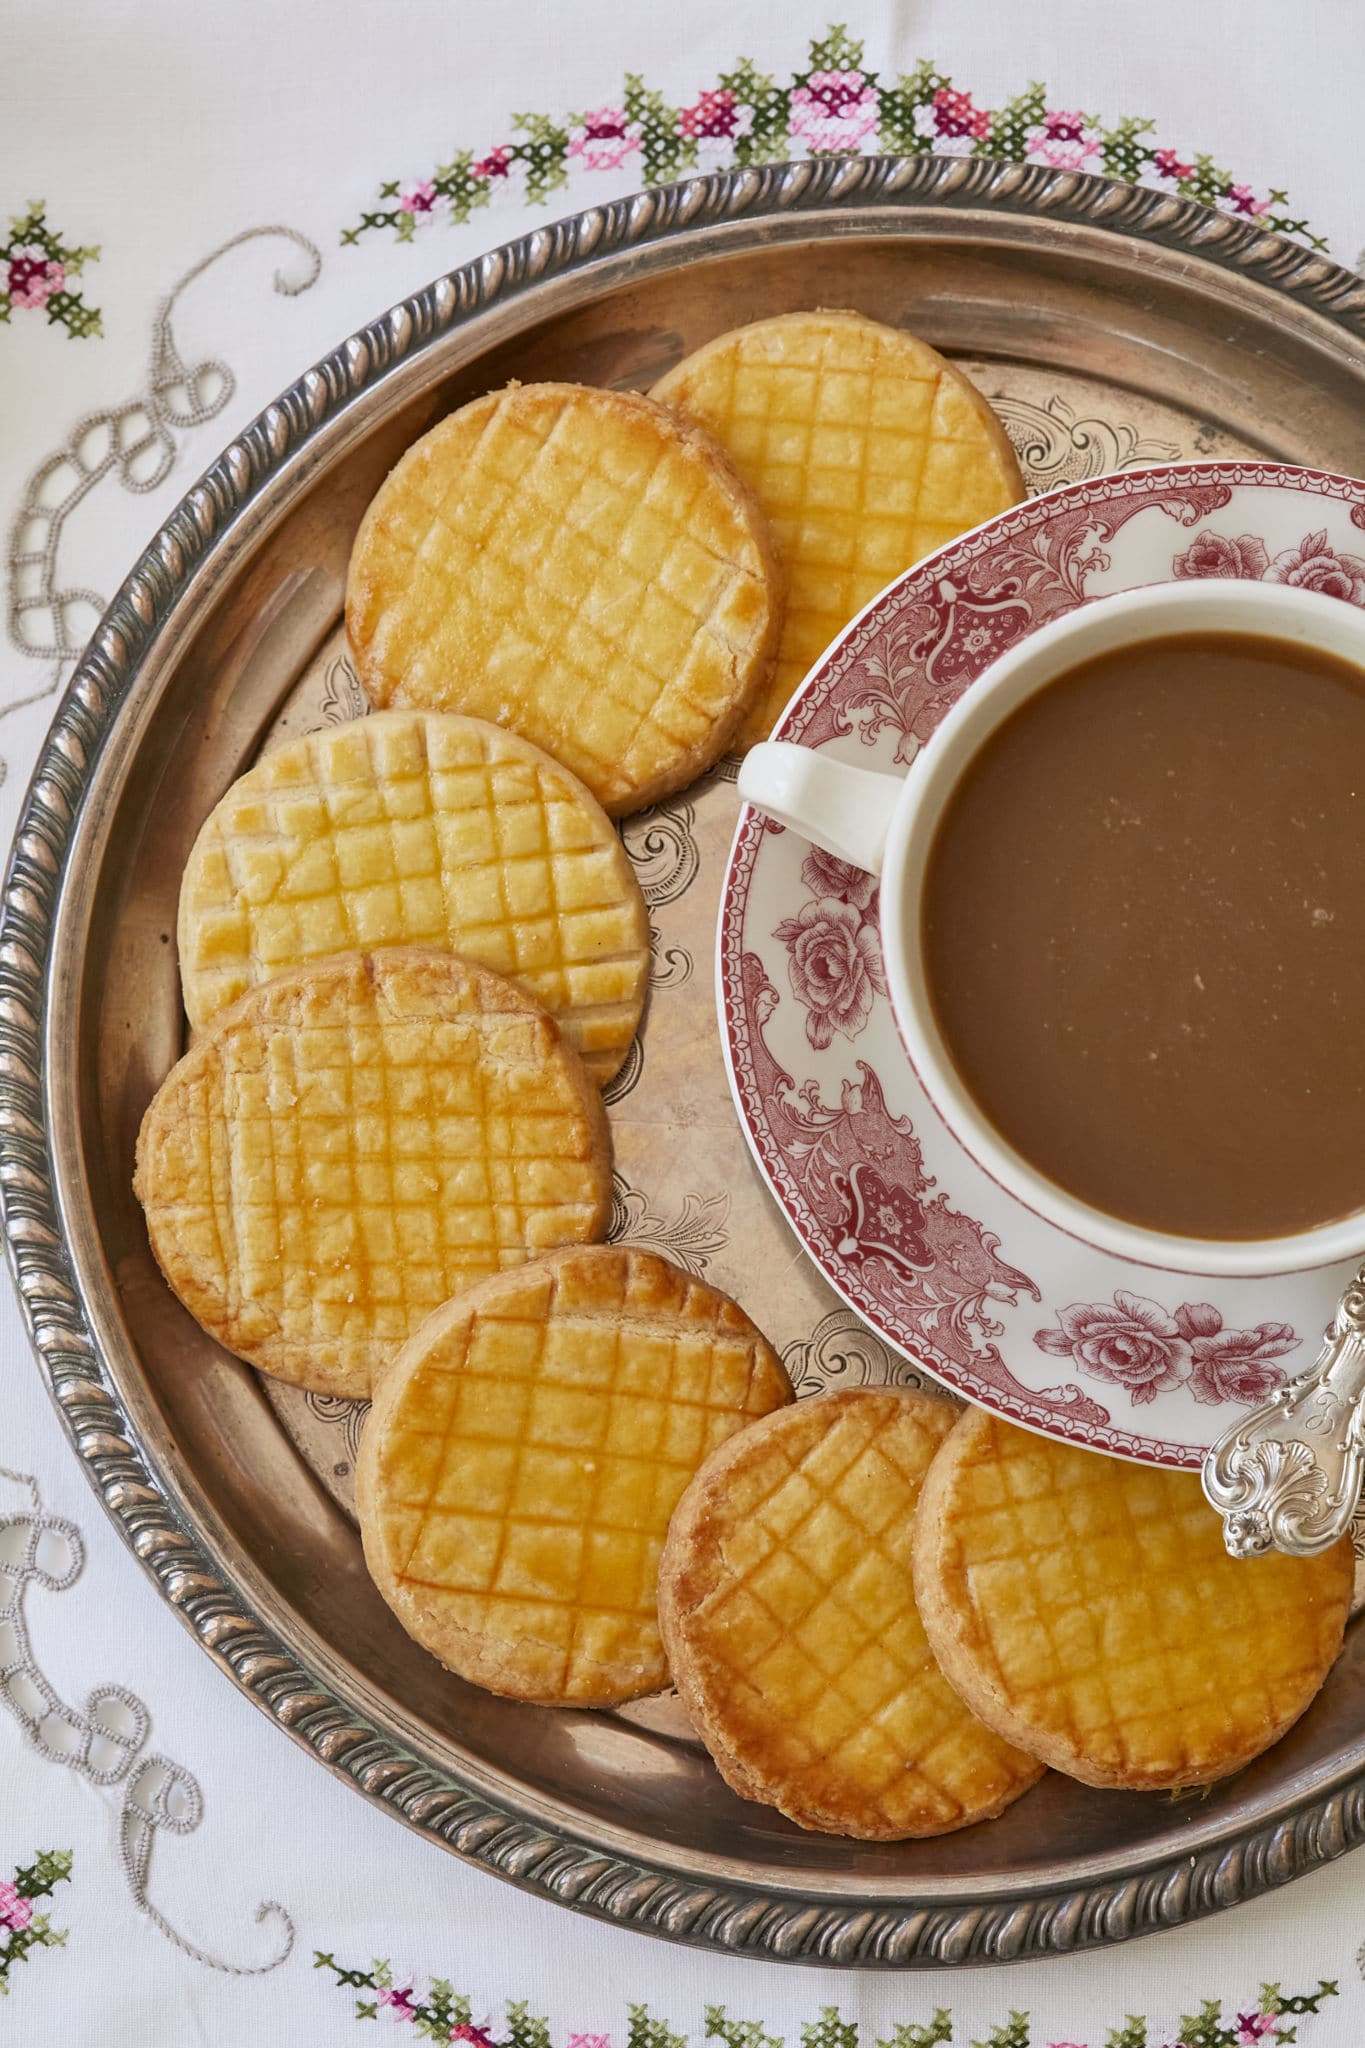 French sable cookies are presented on a tin platter with a mug of hot chocolate. The sable cookies have a crisscross top and golden color.